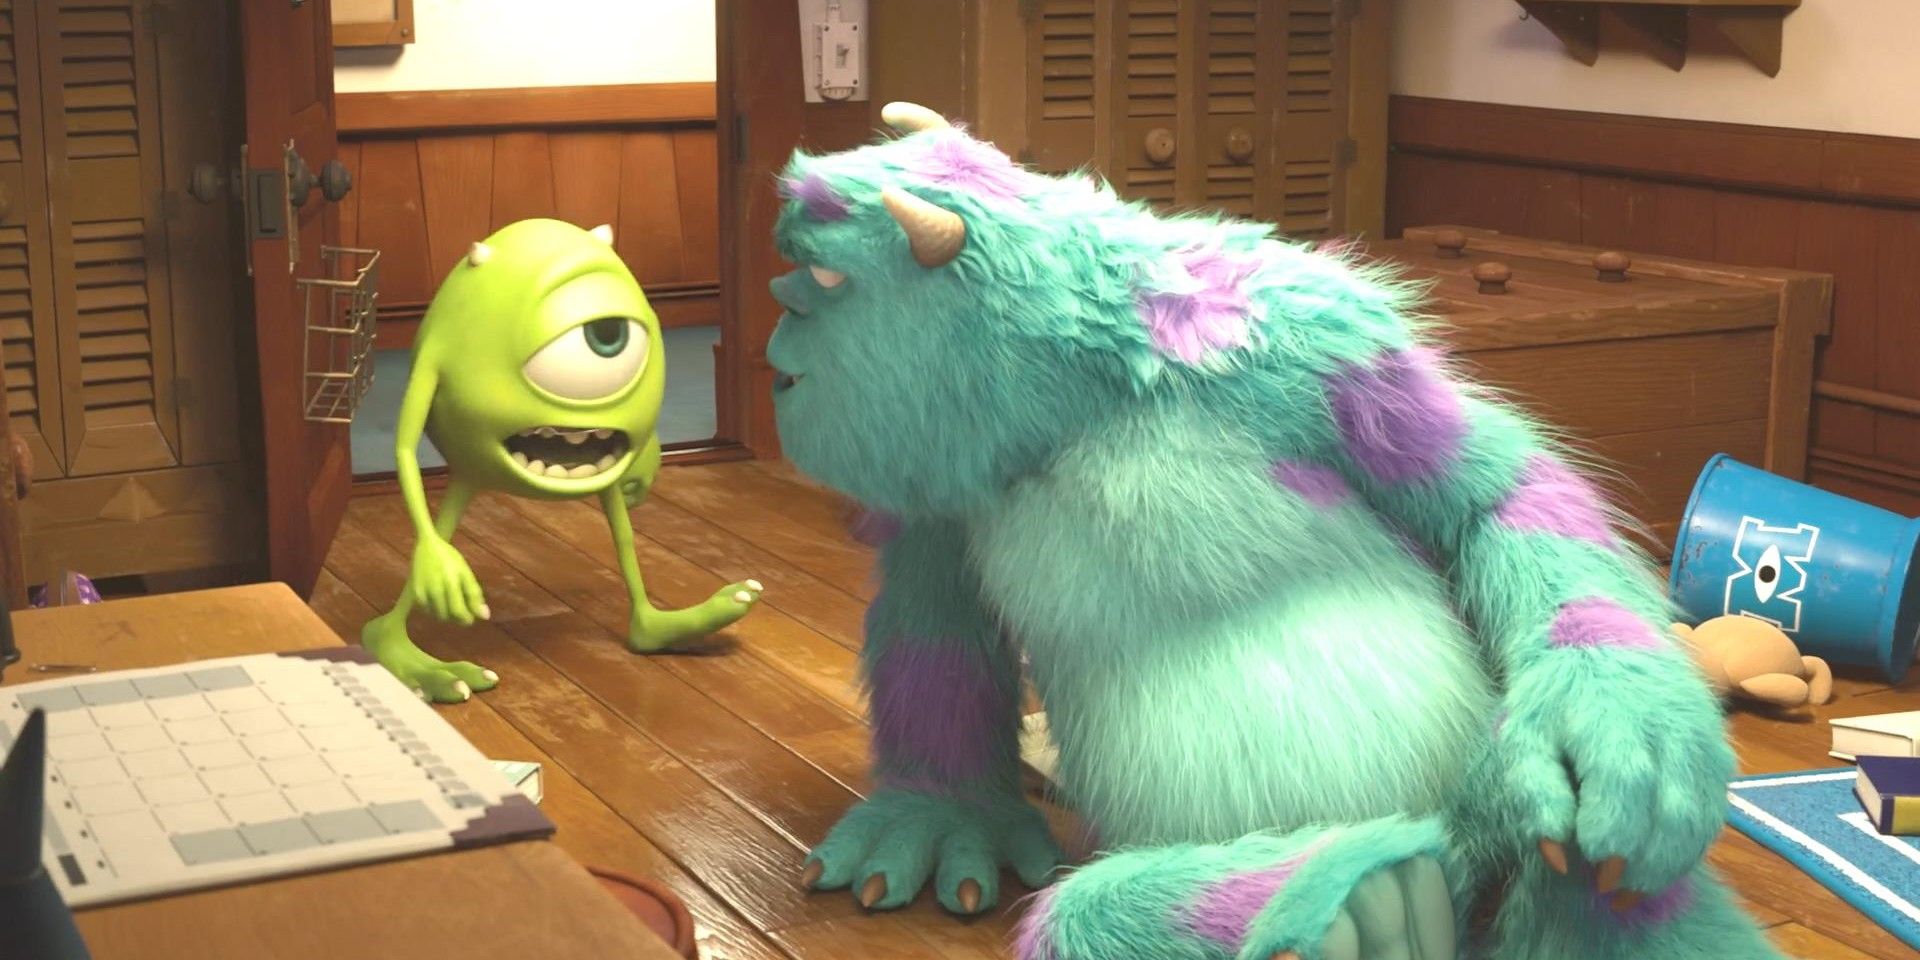 Mike and Sully talk in a dorm in Monsters University